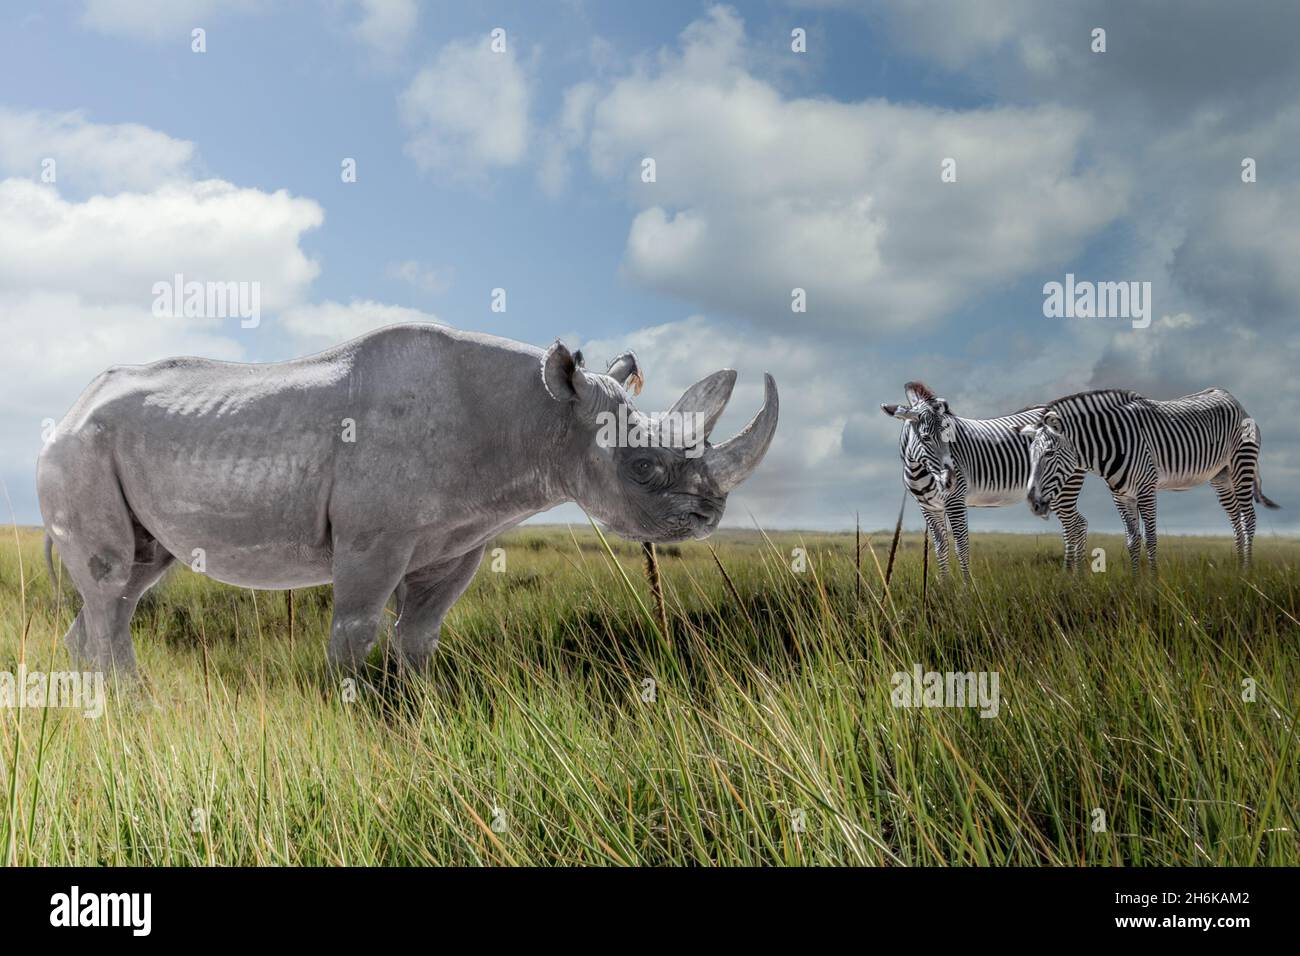 a rhino and two zebrasin the african savannah Stock Photo